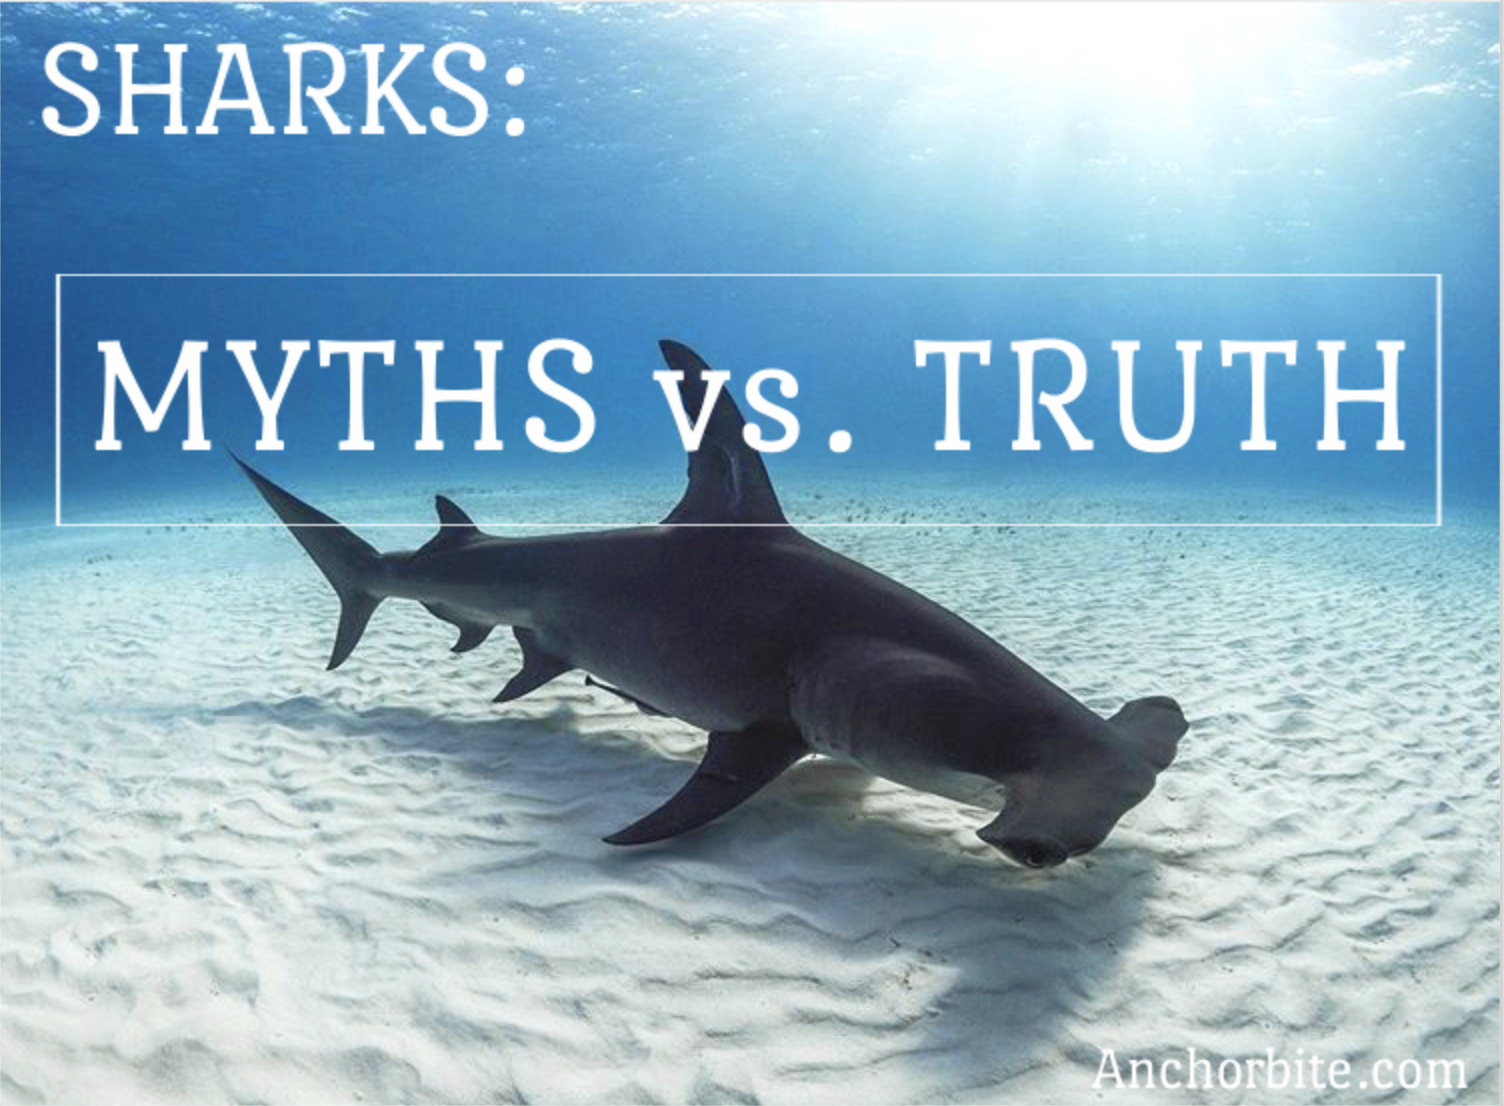 Sharks: Misconceptions vs the truth